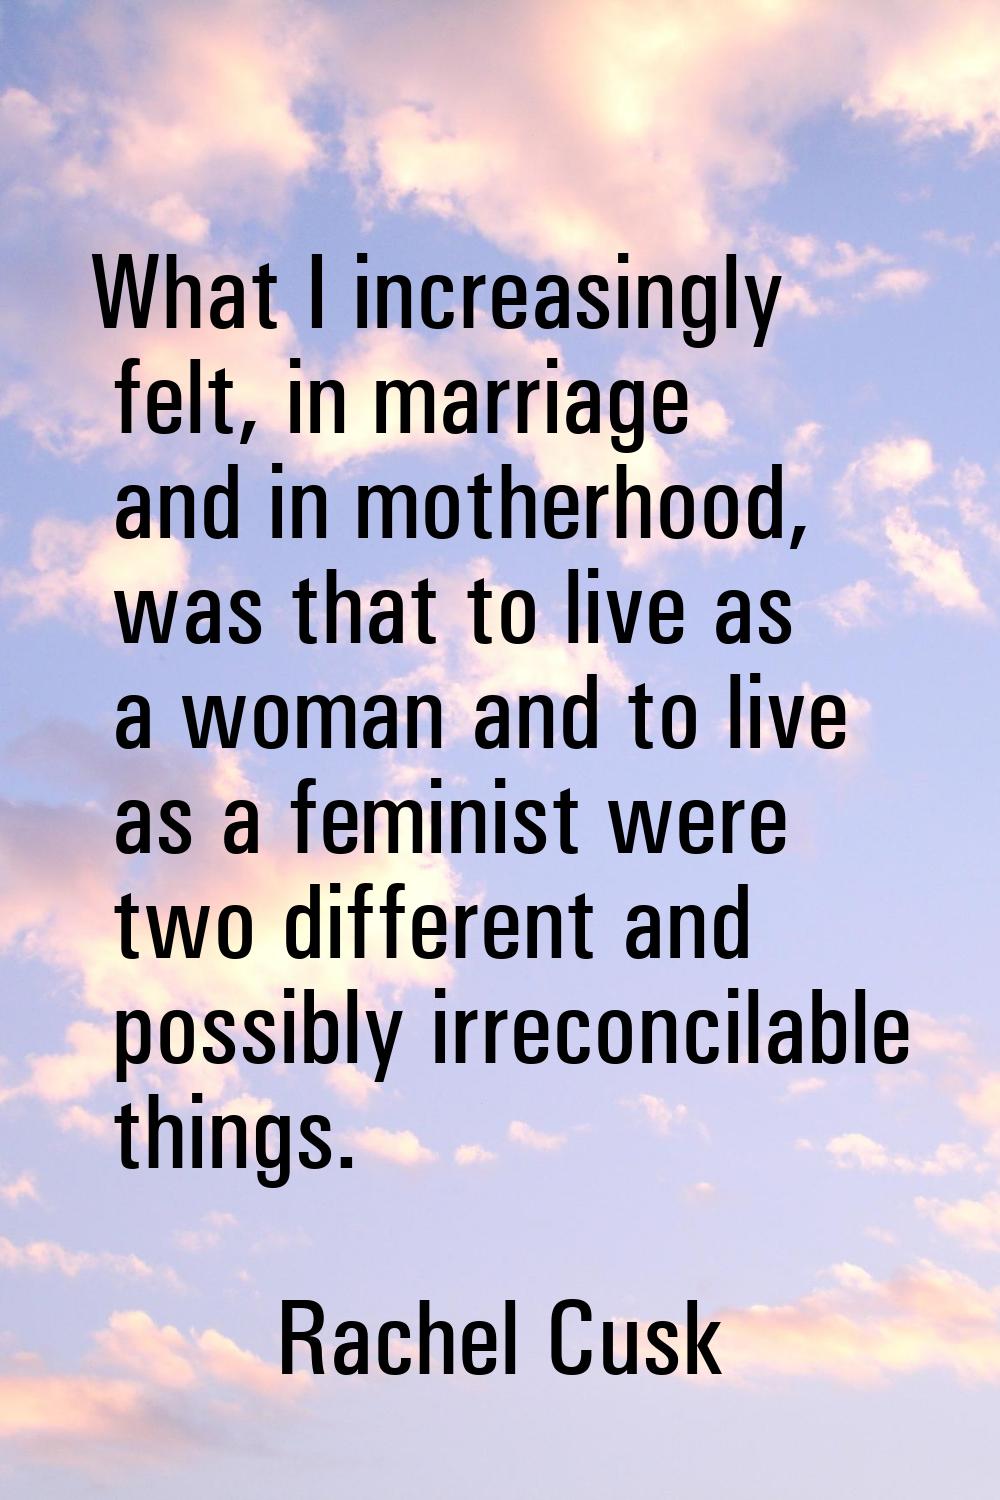 What I increasingly felt, in marriage and in motherhood, was that to live as a woman and to live as